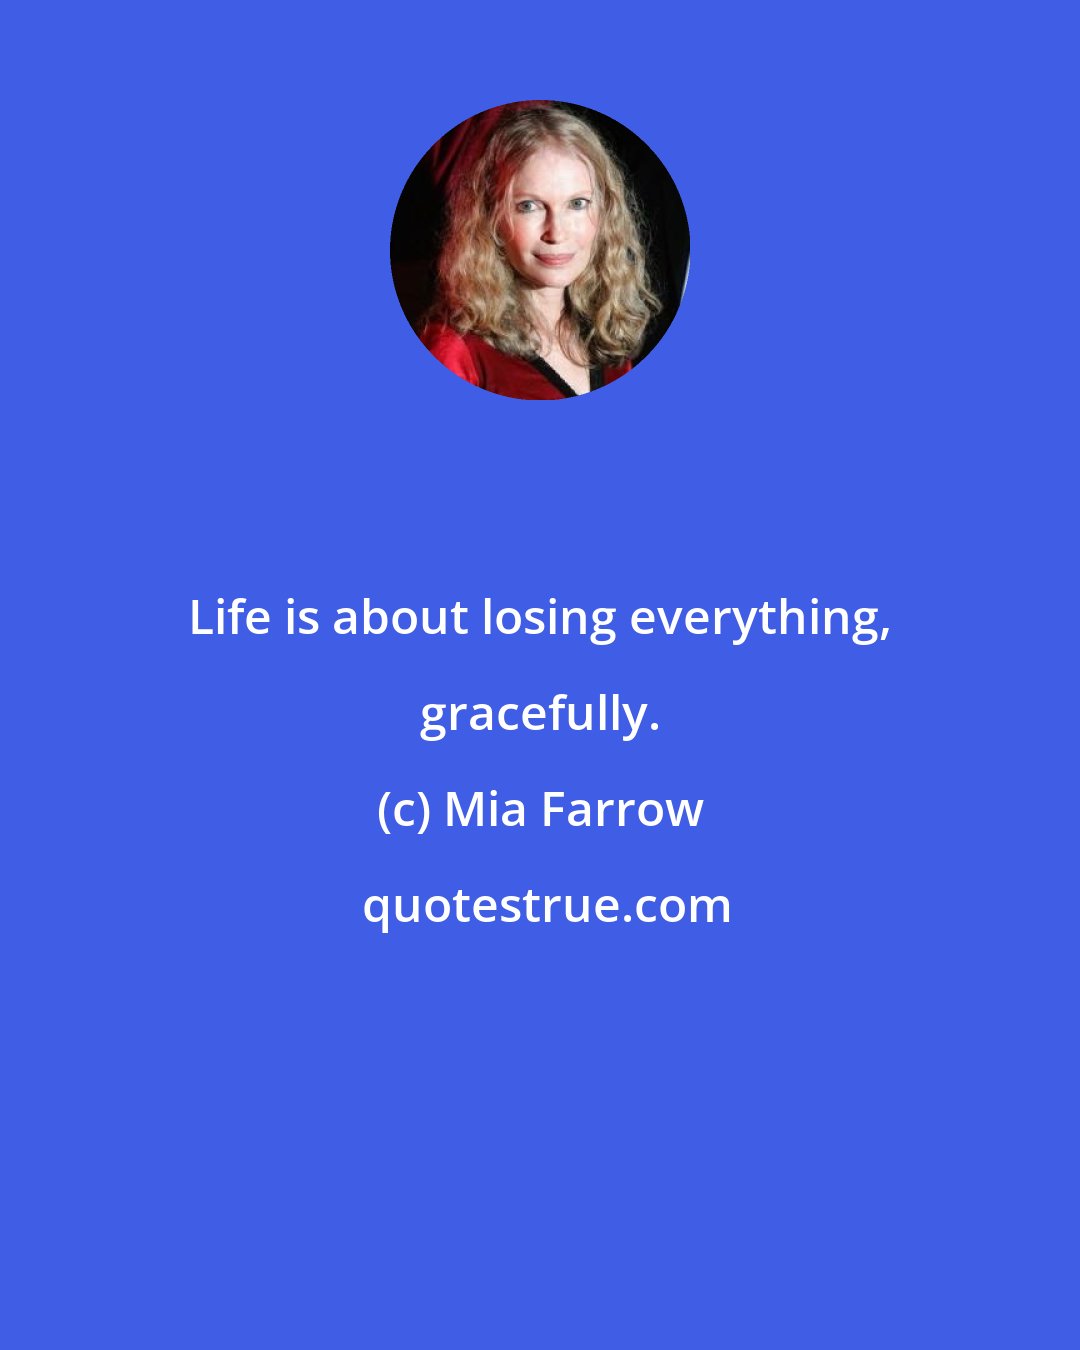 Mia Farrow: Life is about losing everything, gracefully.